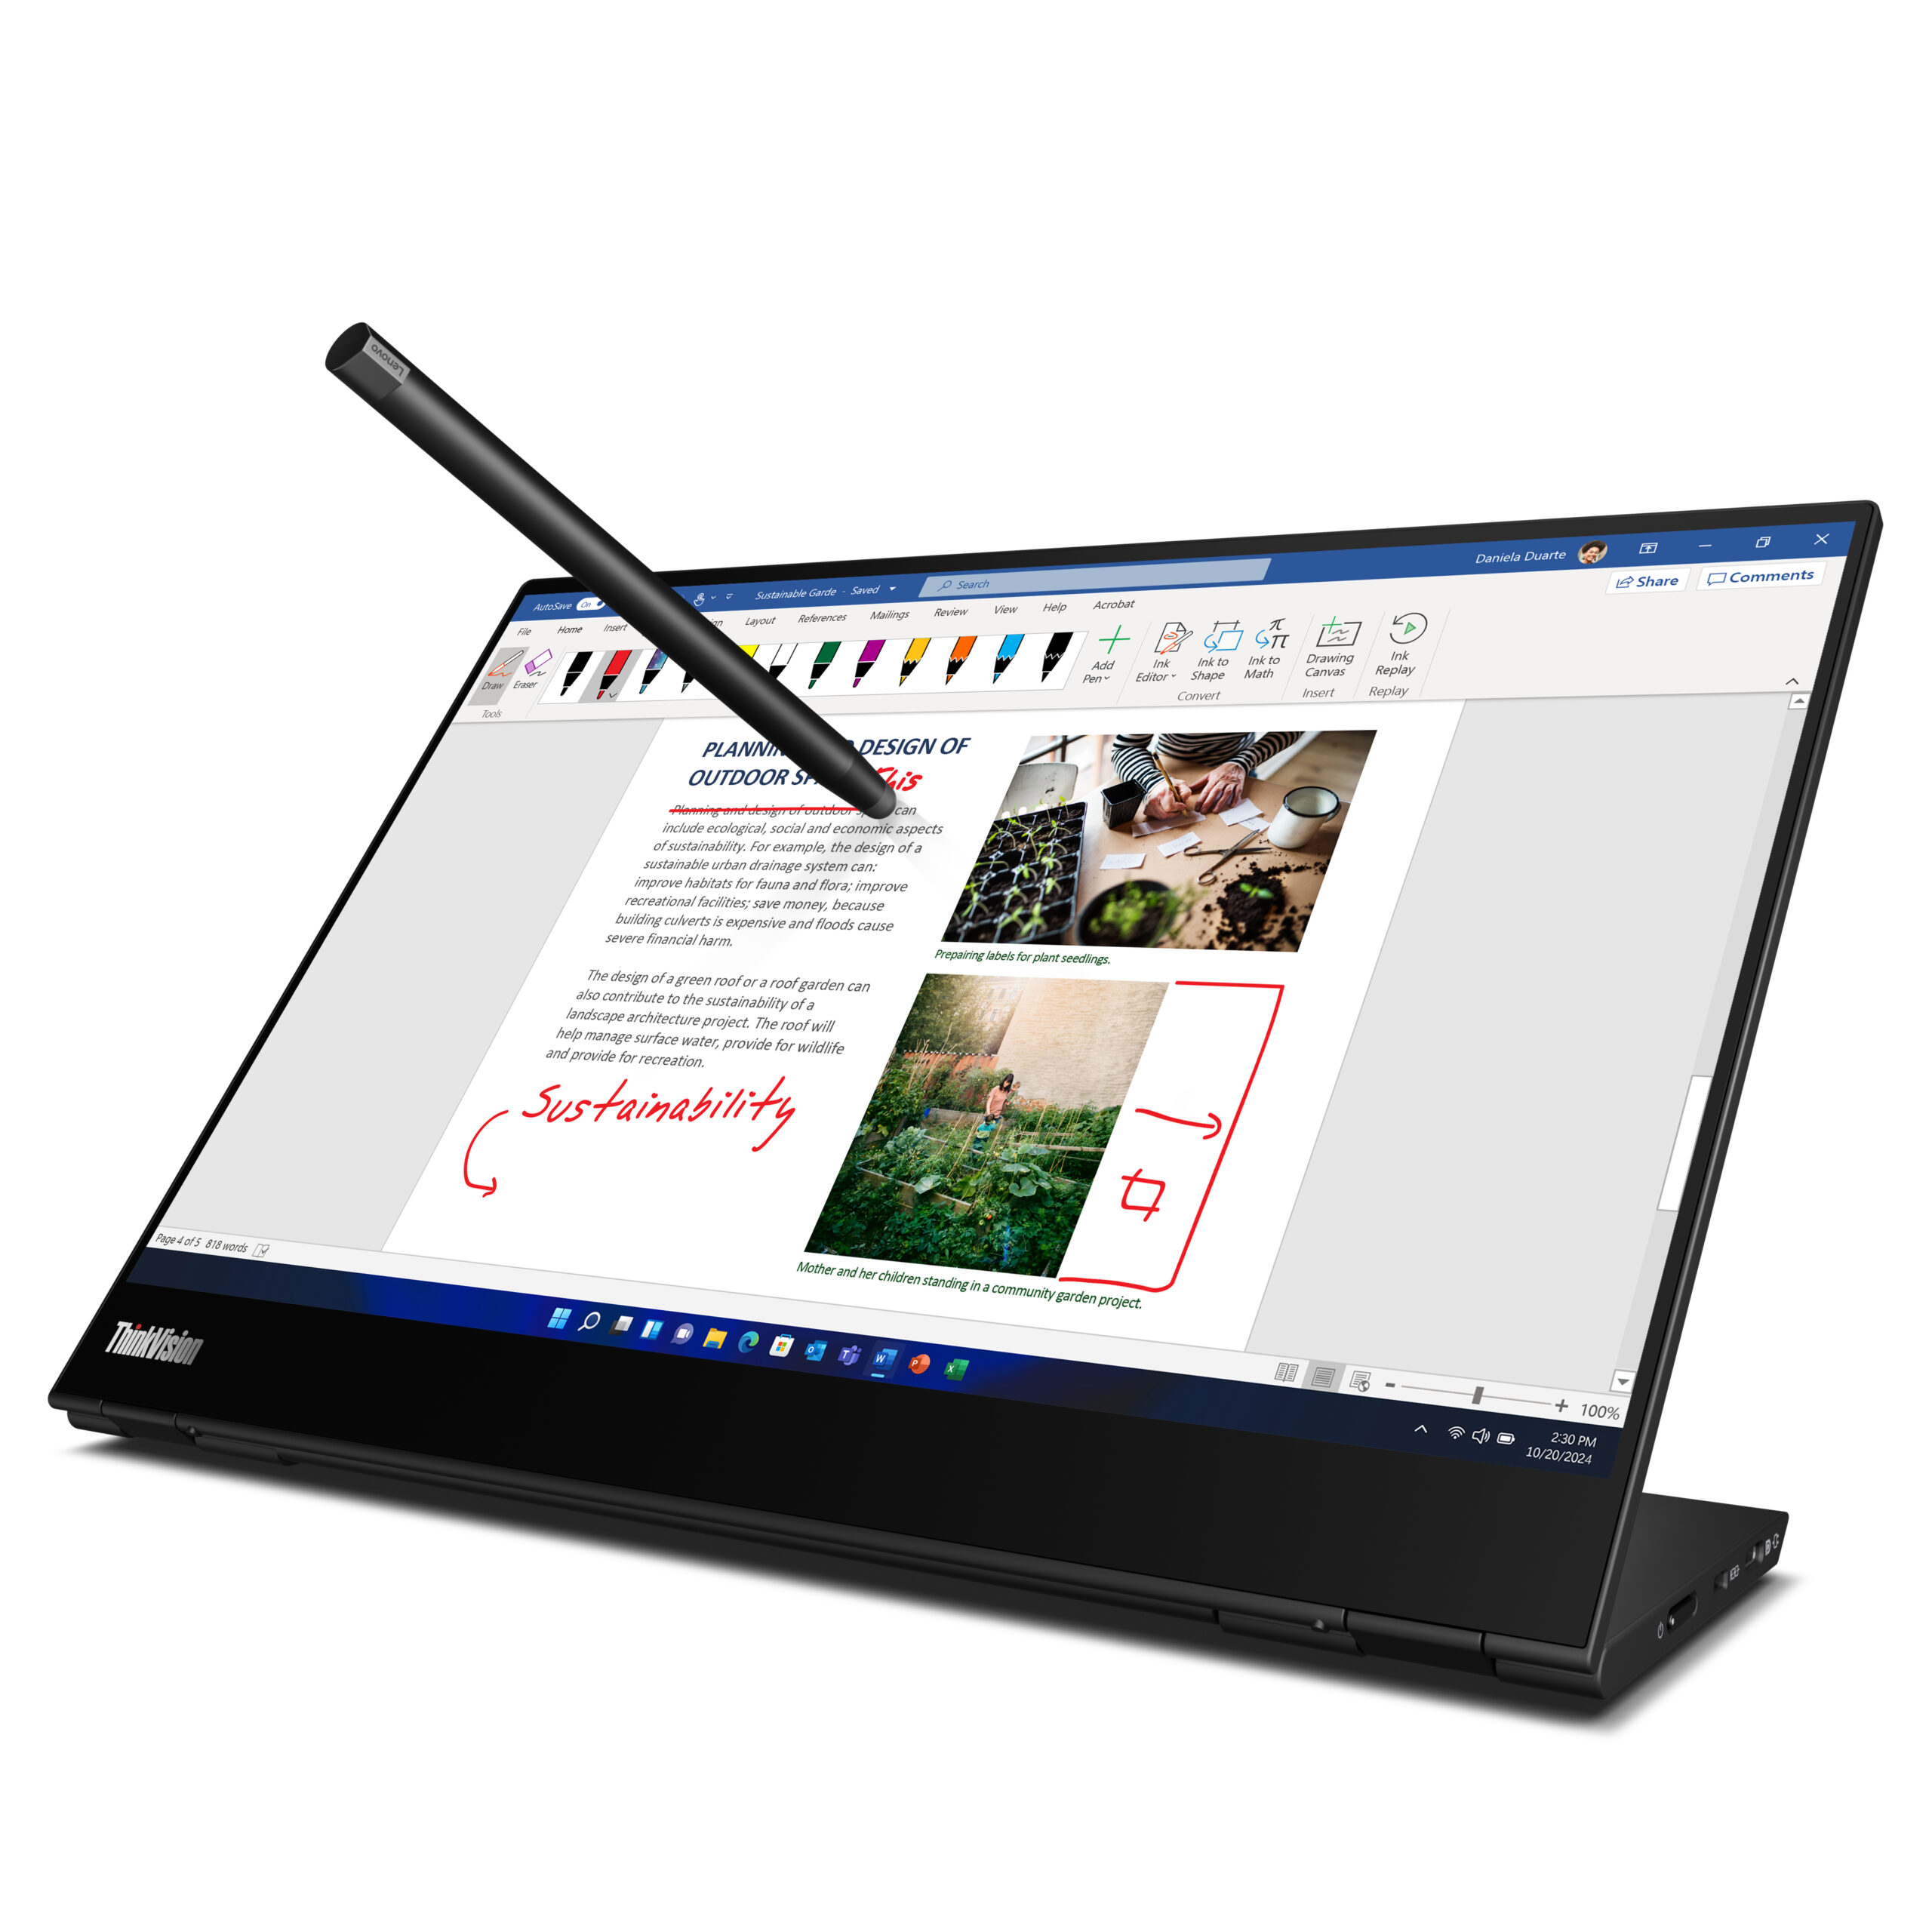 15 Thinkvision M14t Gen 2 Touch Screen Digital Pen scaled